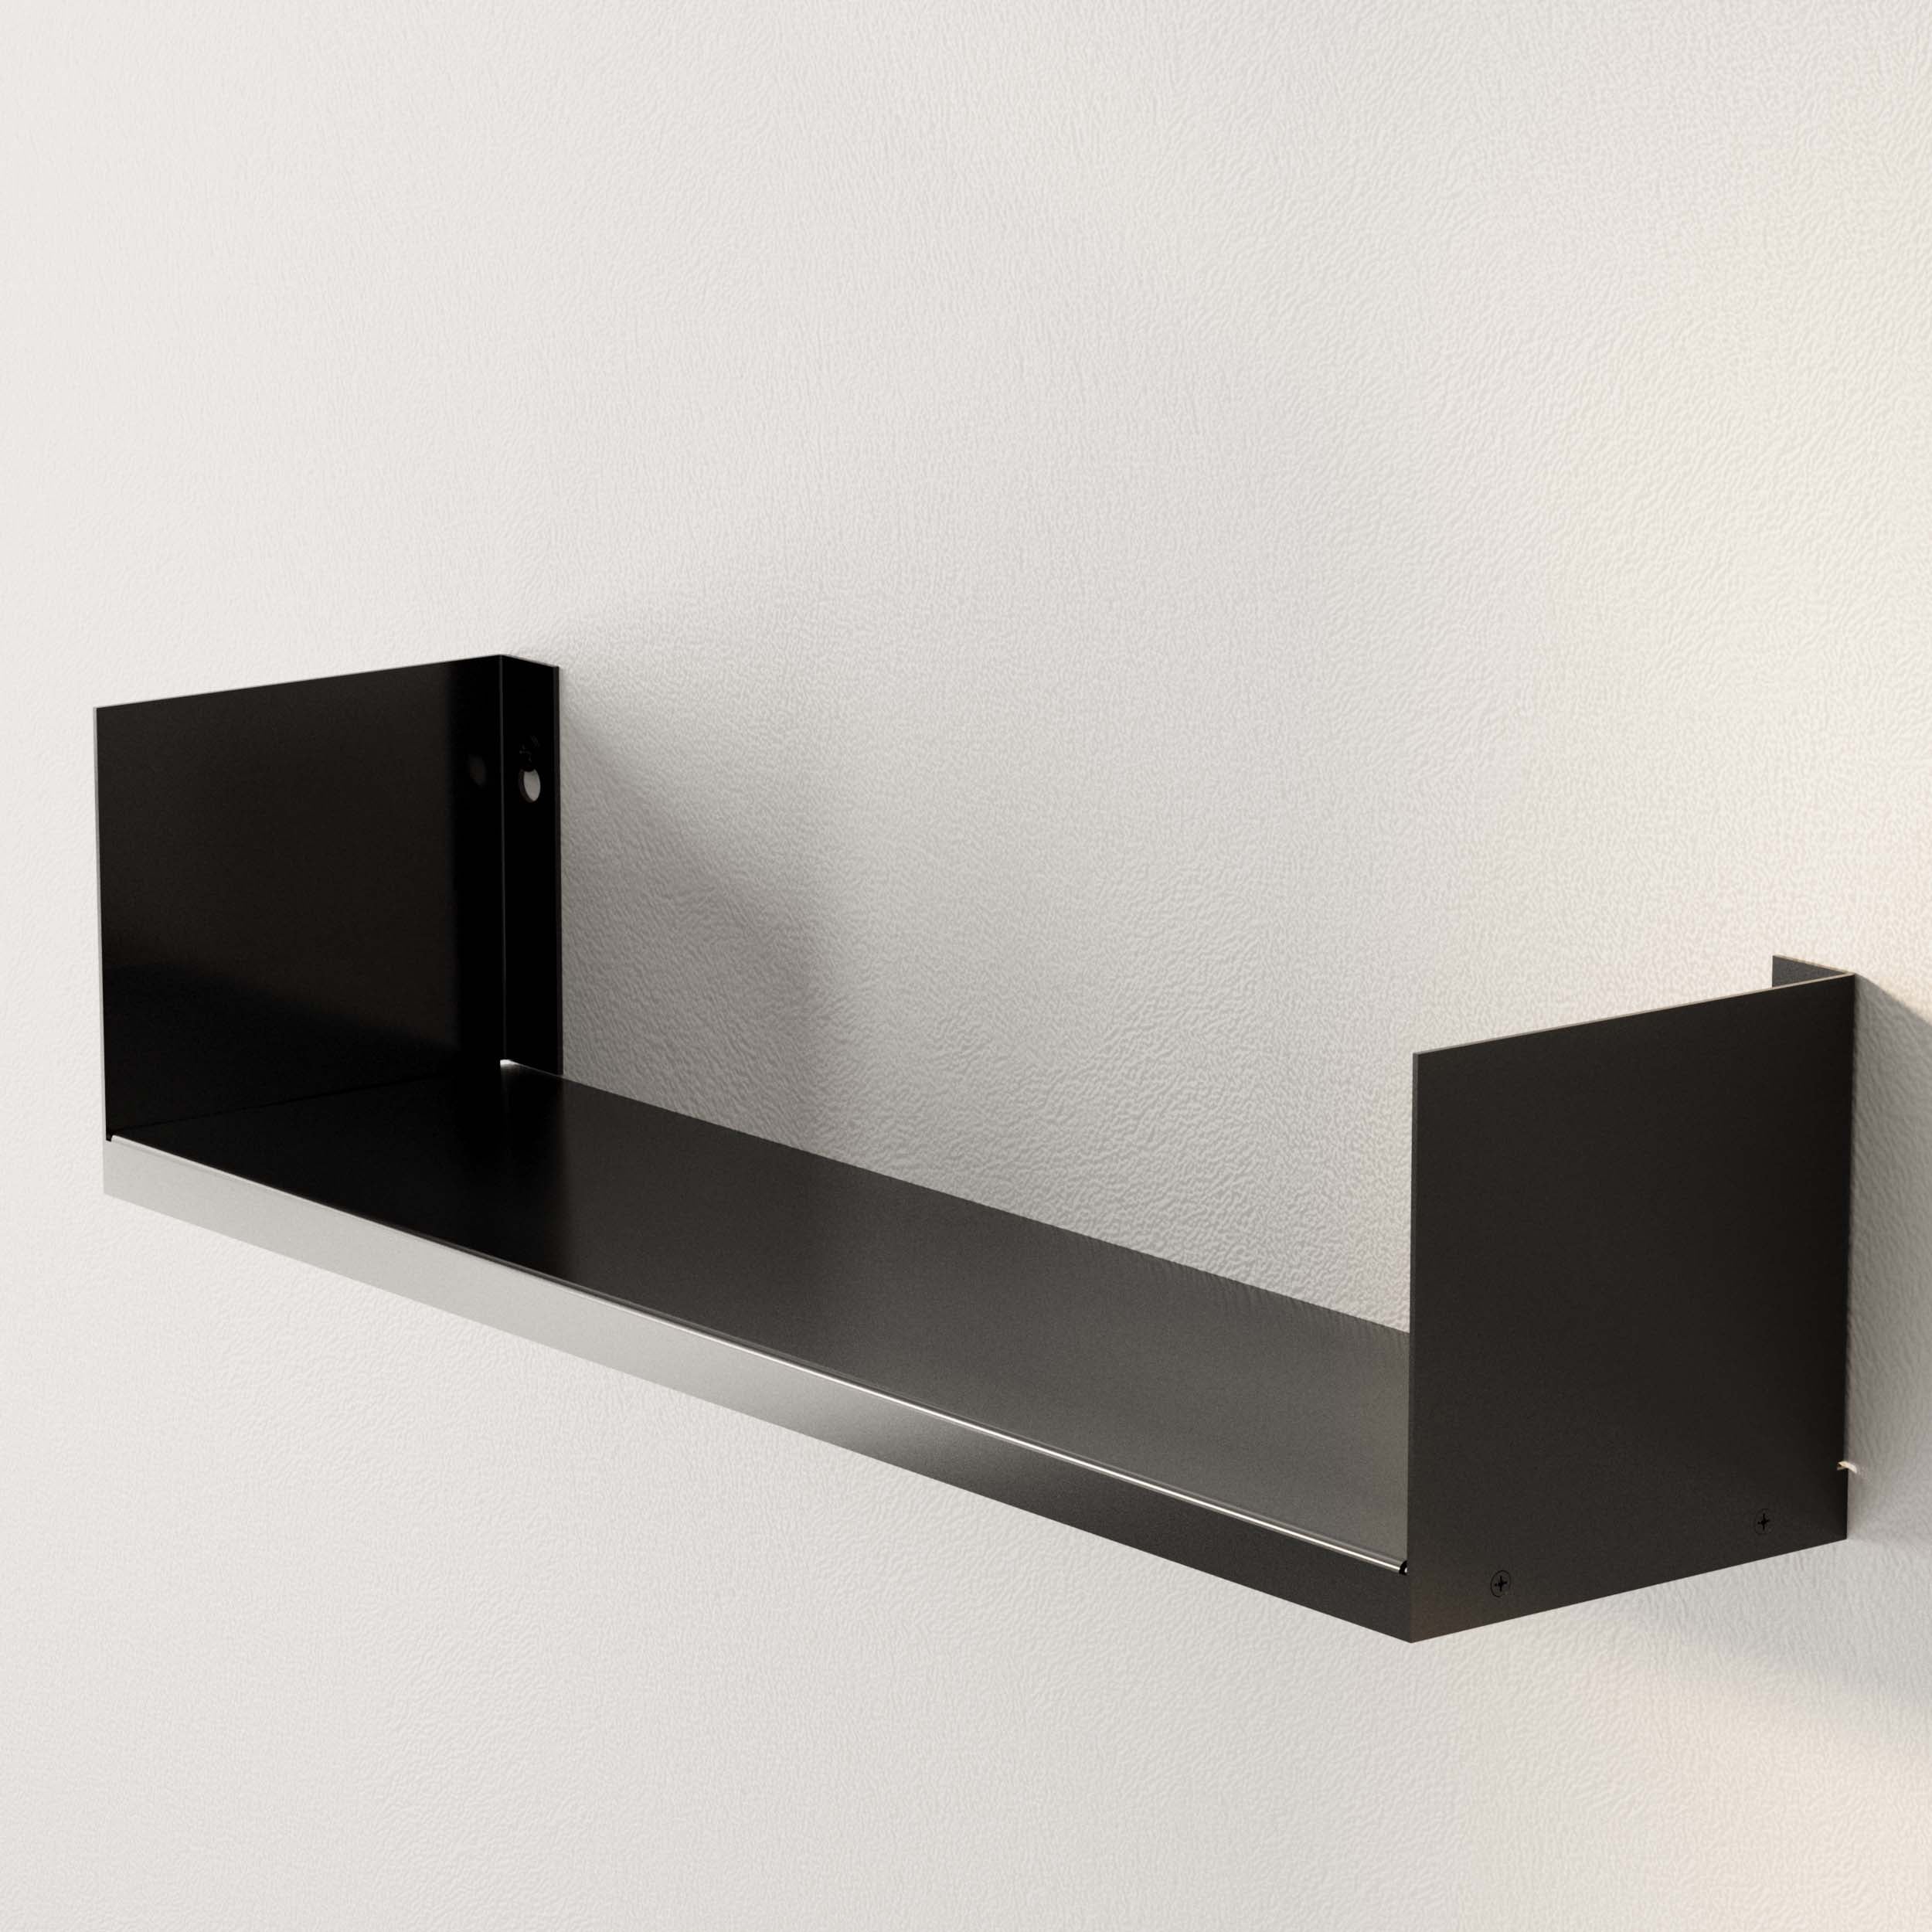 The sleek metal U-shaped black wall shelf, mounted on the wall, offers a minimalist look, ready to hold and display your favorite decor pieces or functional items.